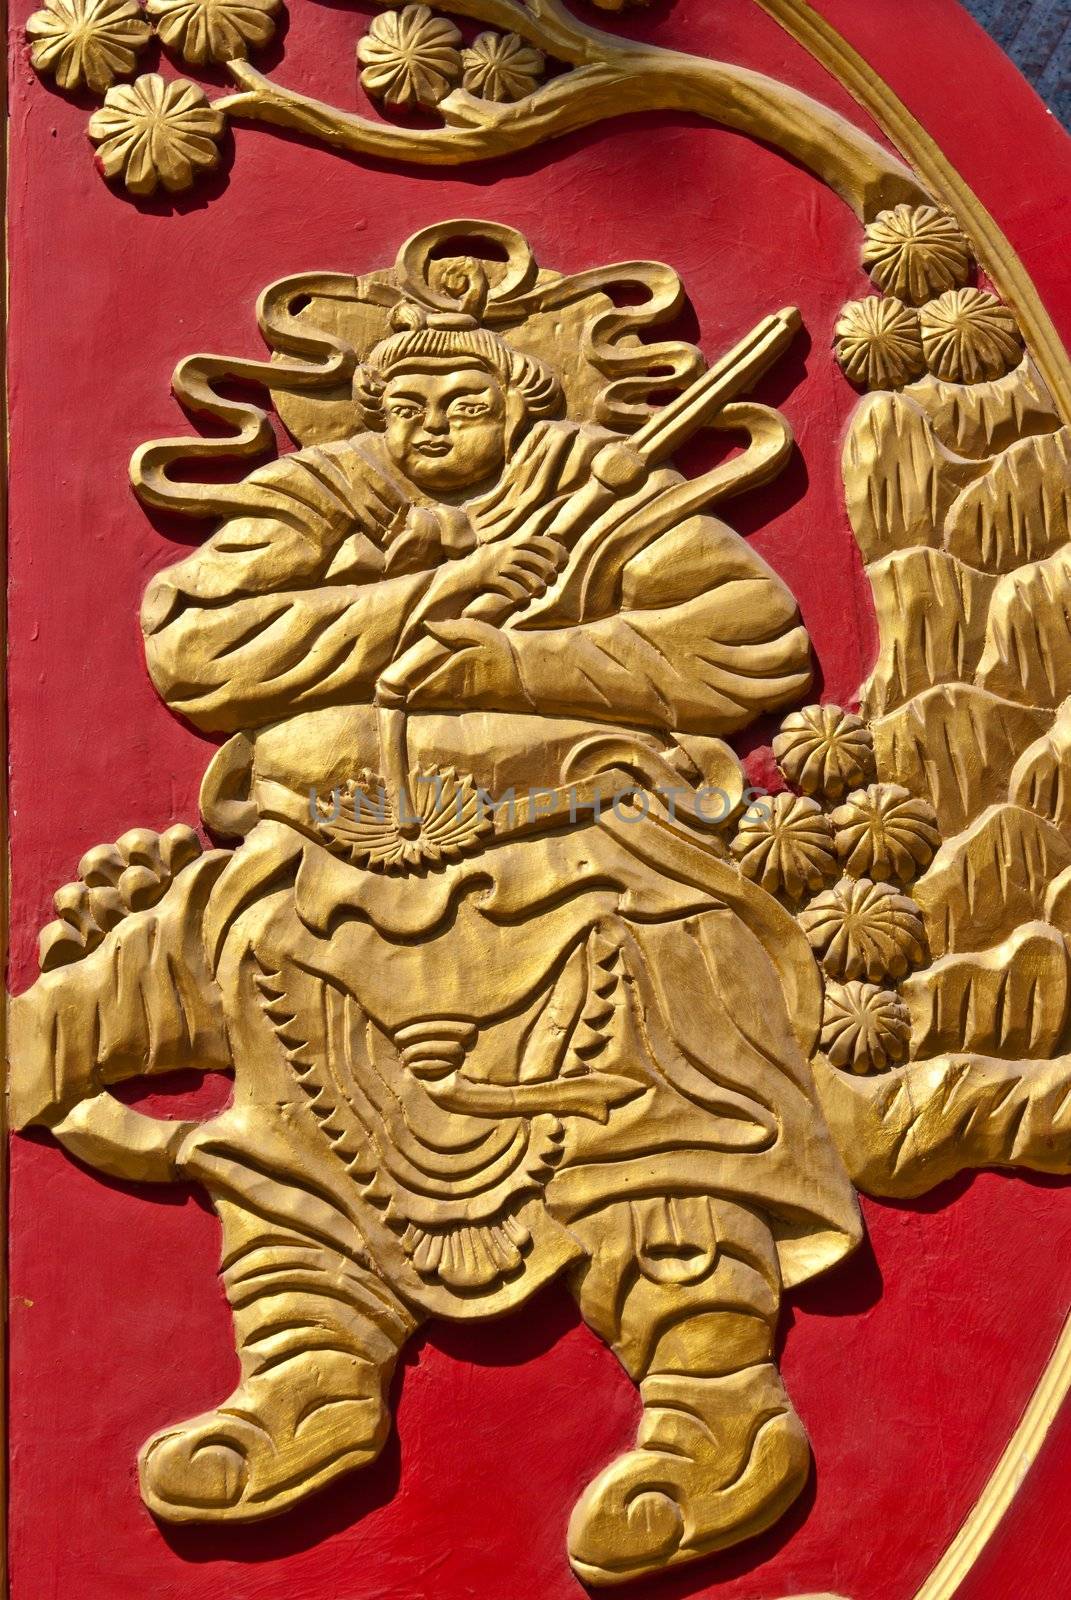 Chinese golden wall art work on red wood, can be use for related chinese concept design